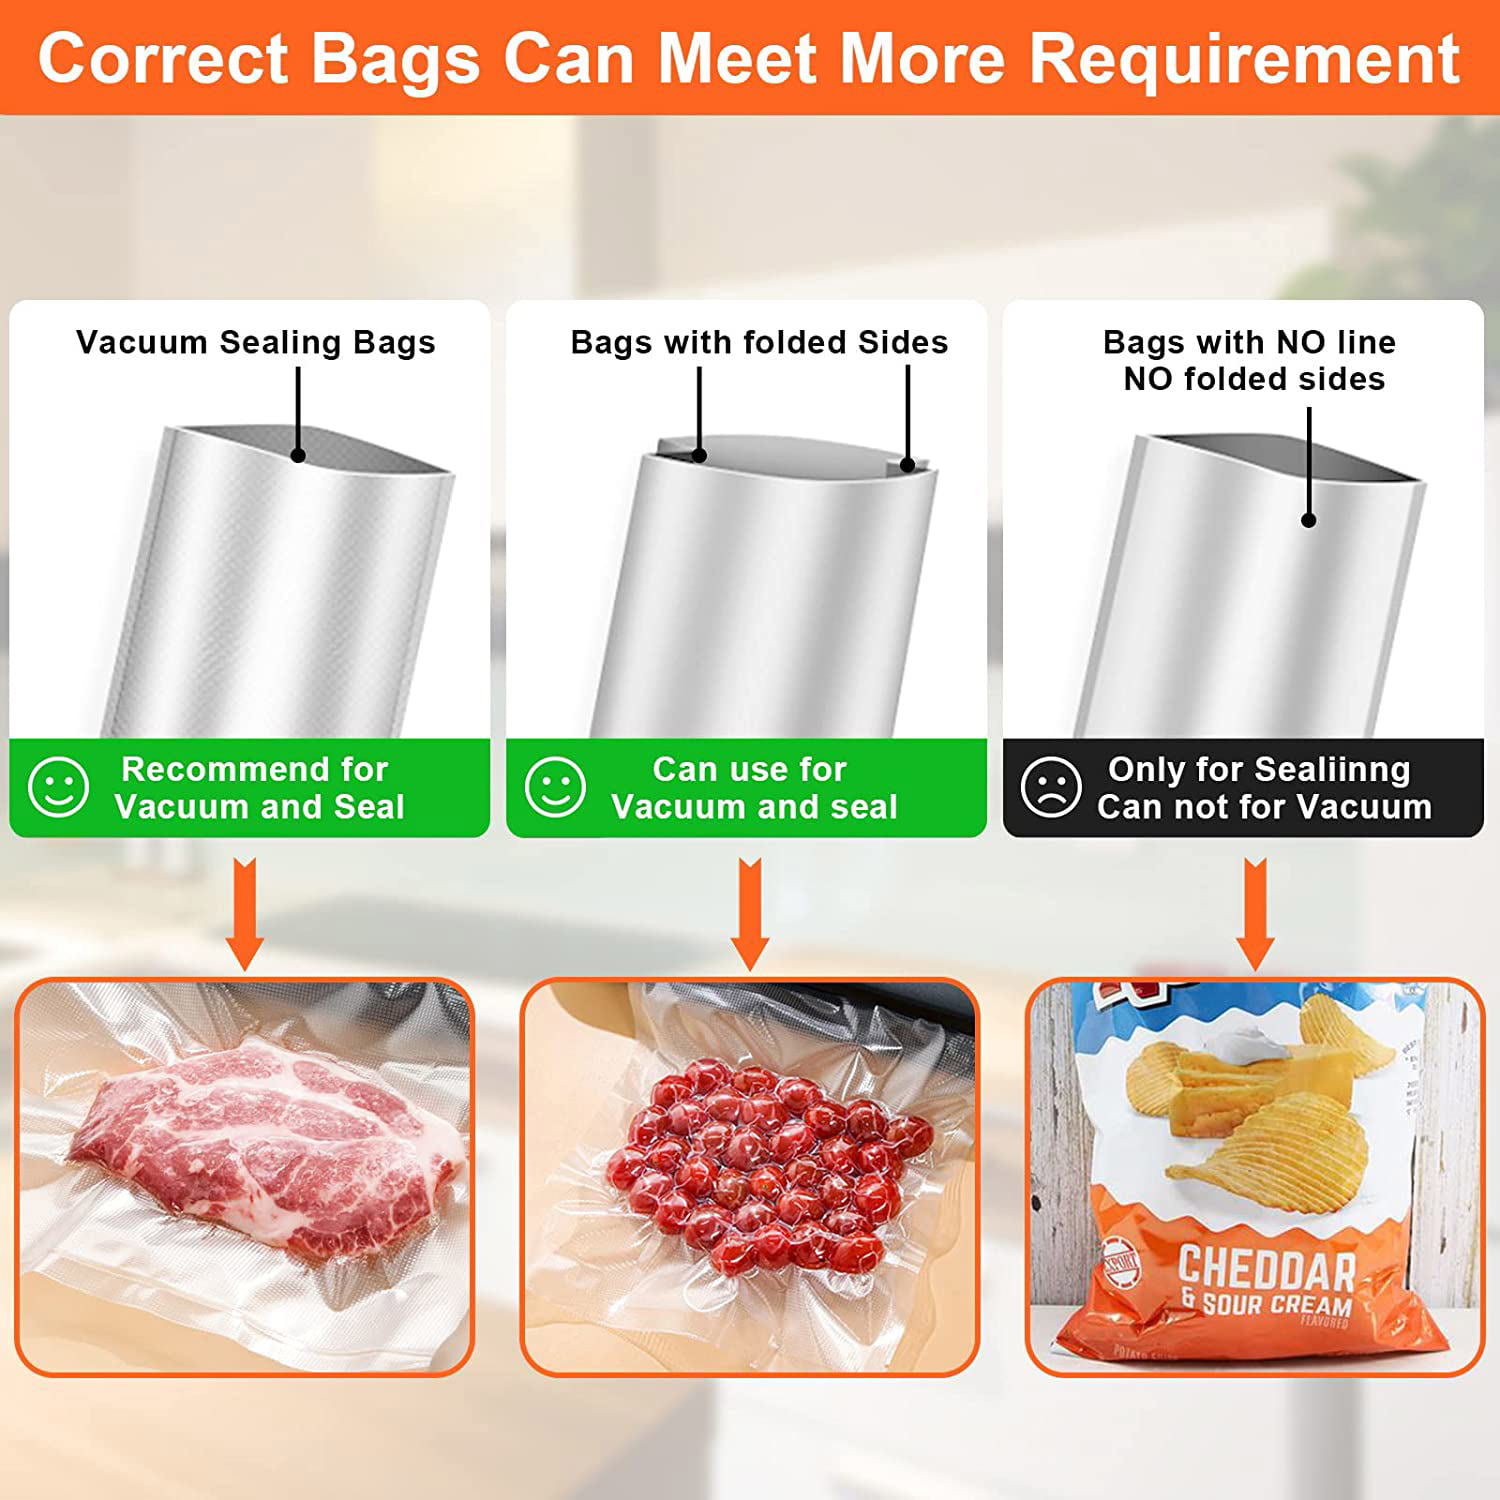 Two Easy Hacks for “Vacuum-Sealing” Bags Without a Vacuum Sealer